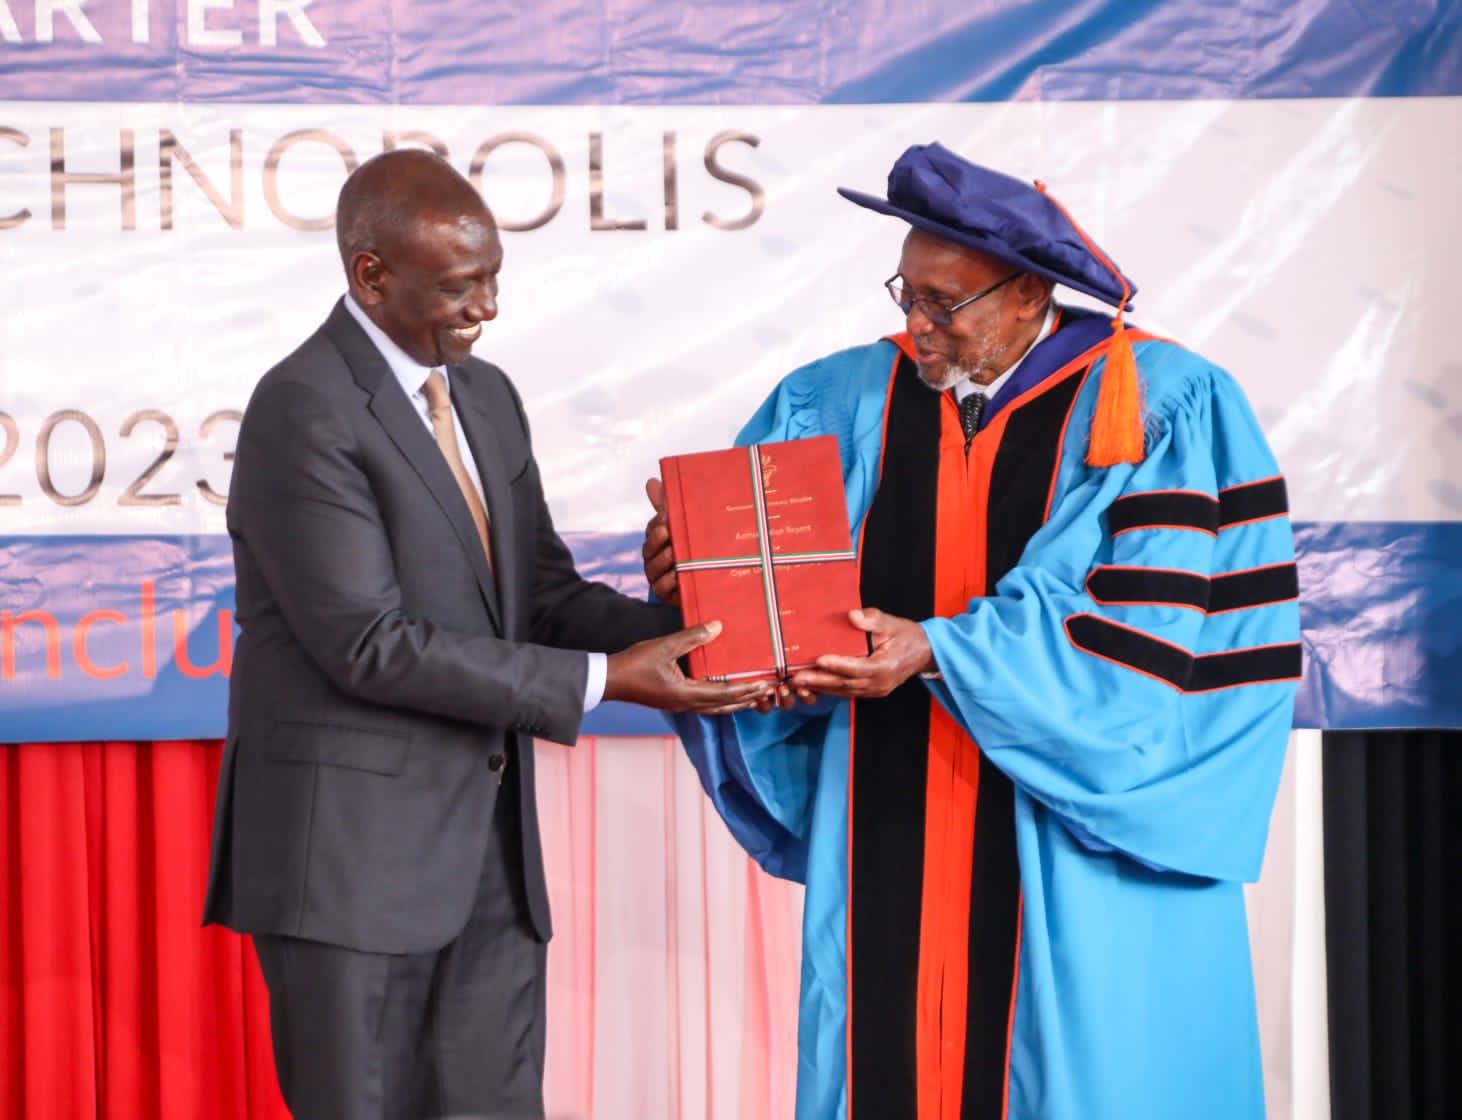 CS Machongu has announce the appointment of 13 new University Vice Chancellors